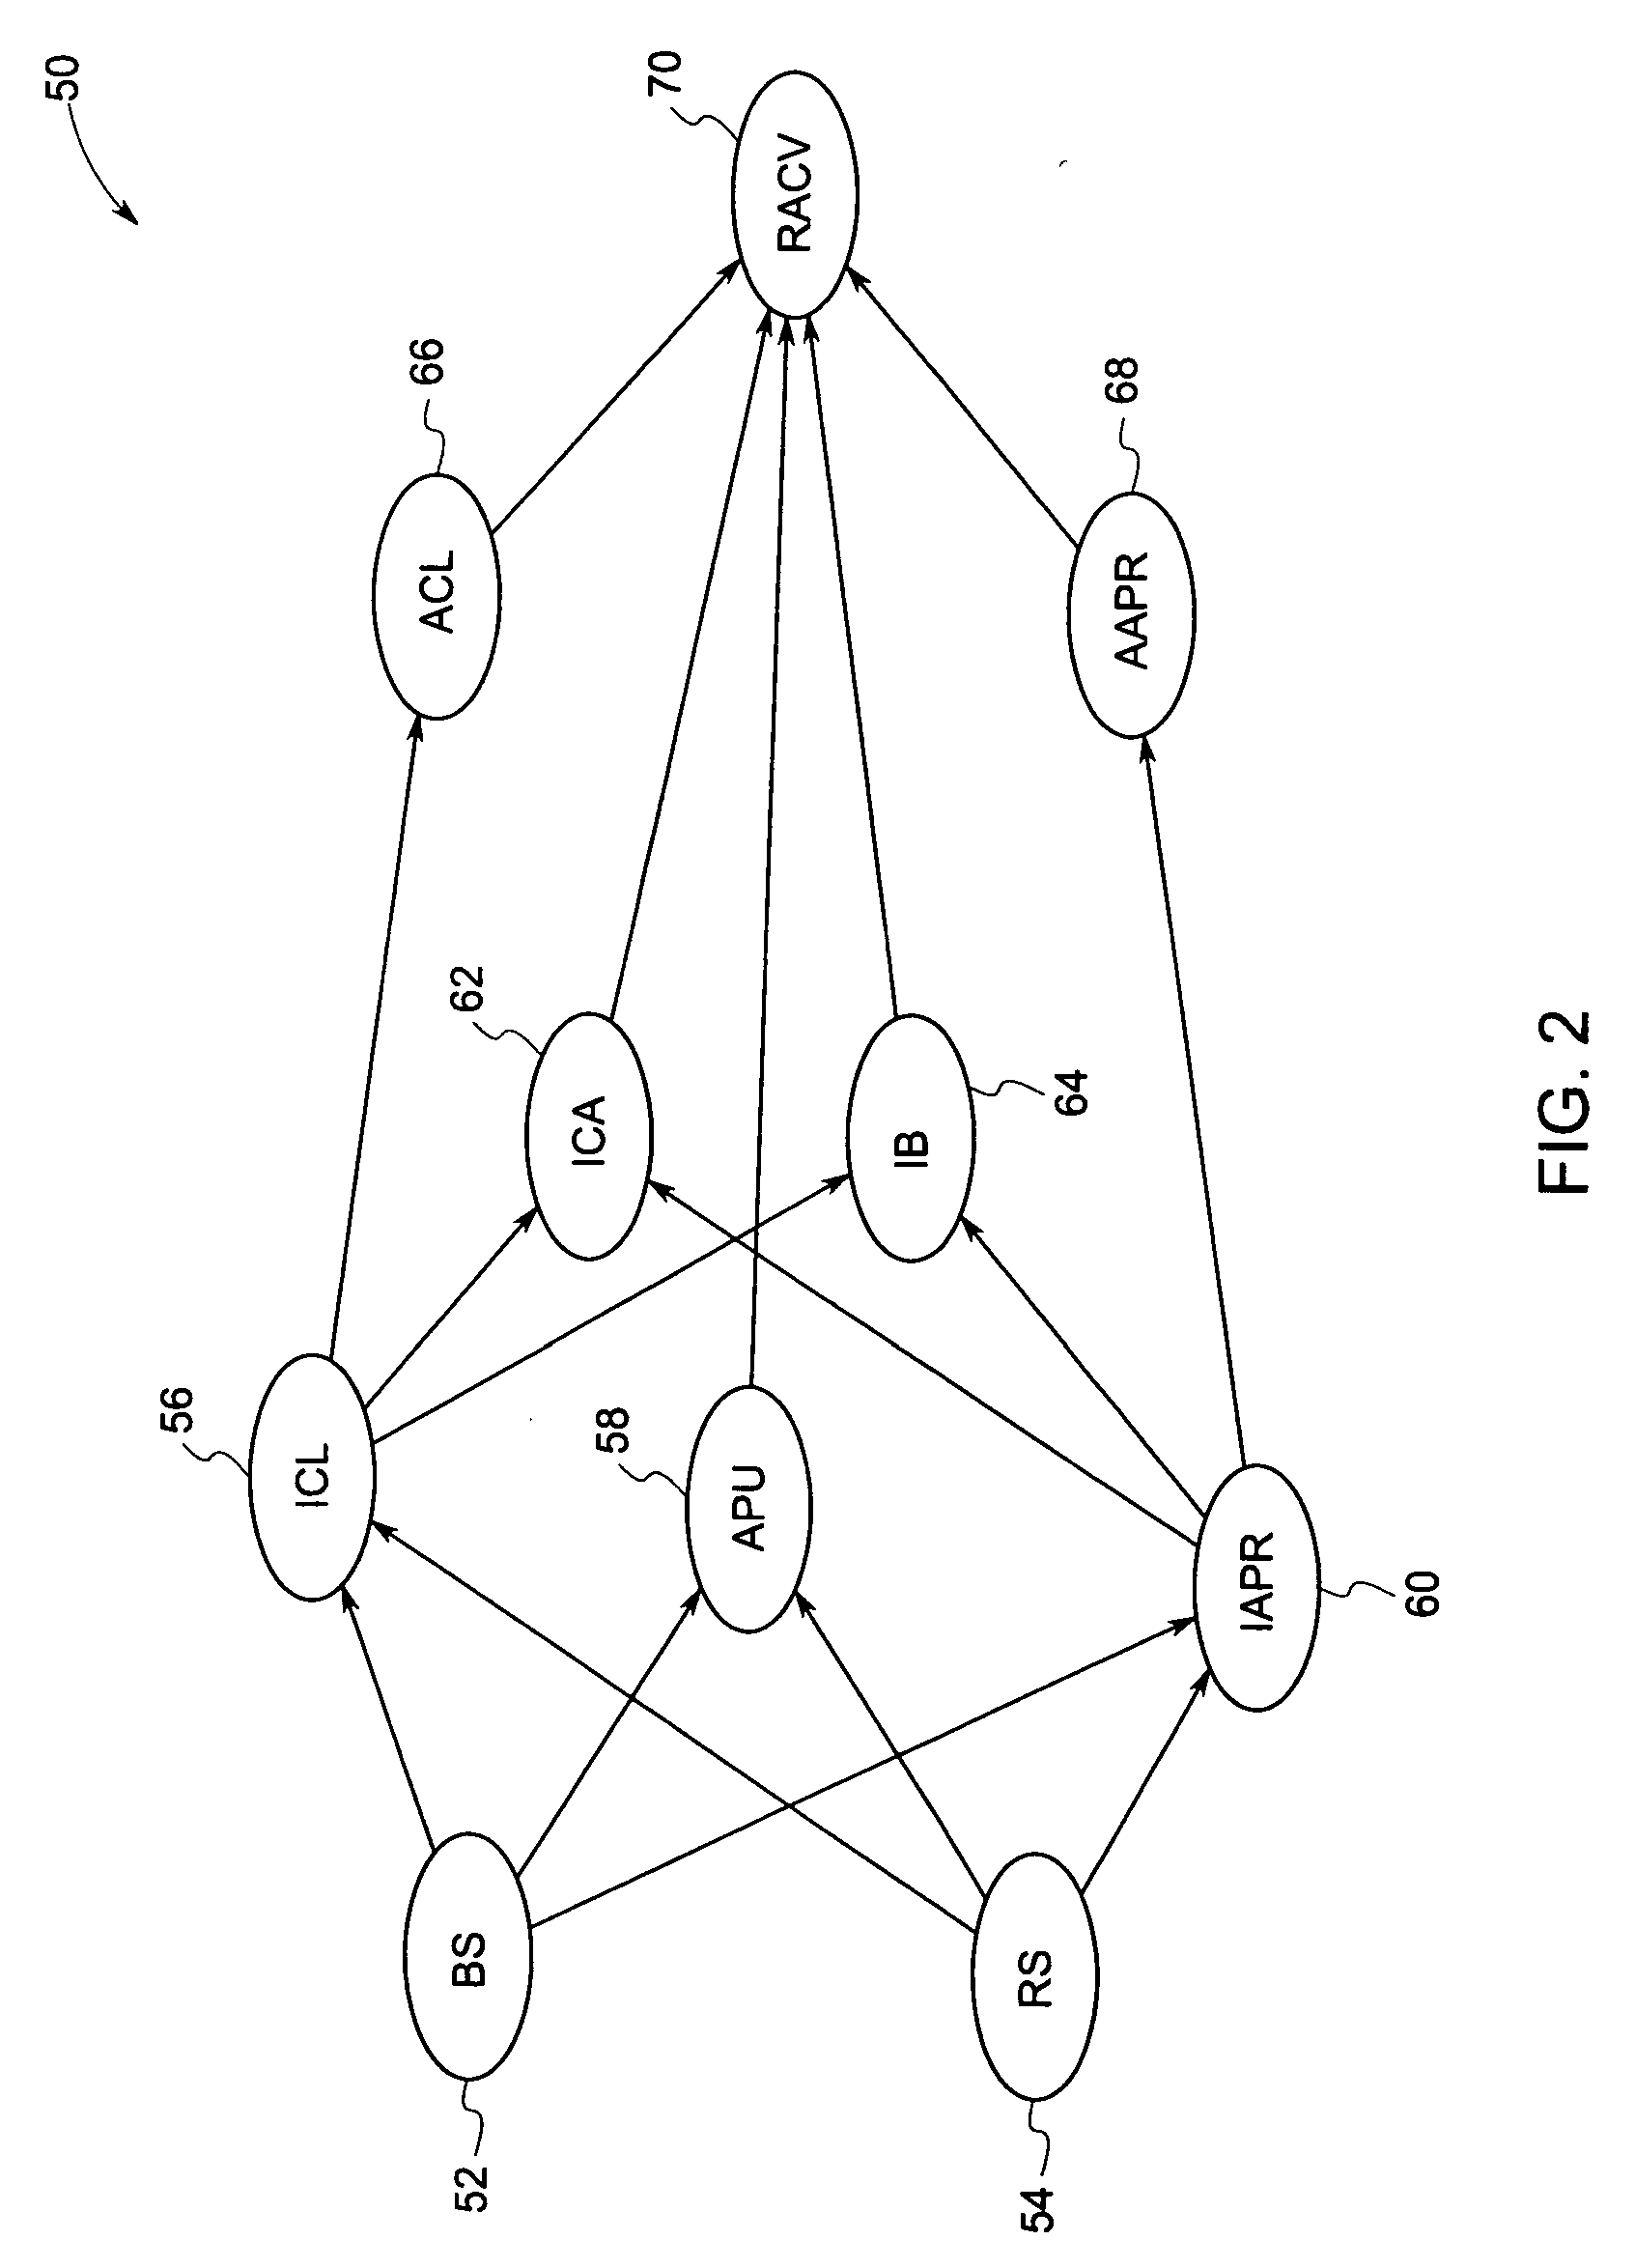 System and method for integrating risk and marketing objectives for making credit offers